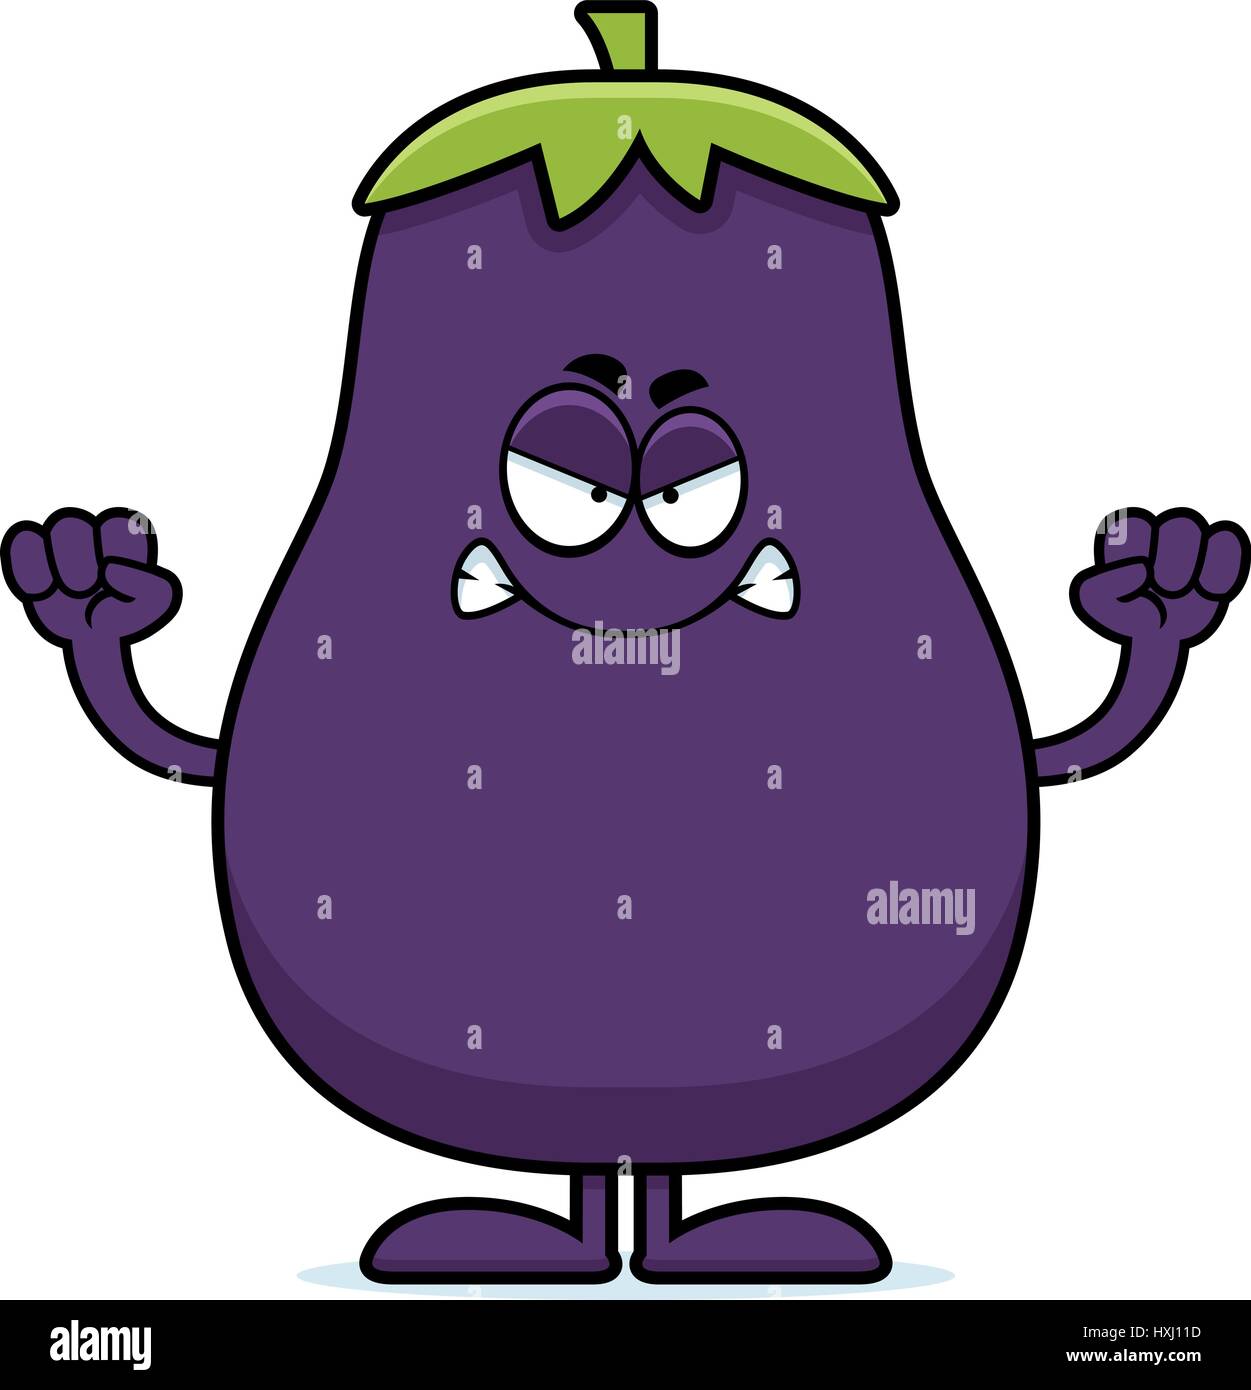 A cartoon illustration of an eggplant looking angry. Stock Vector